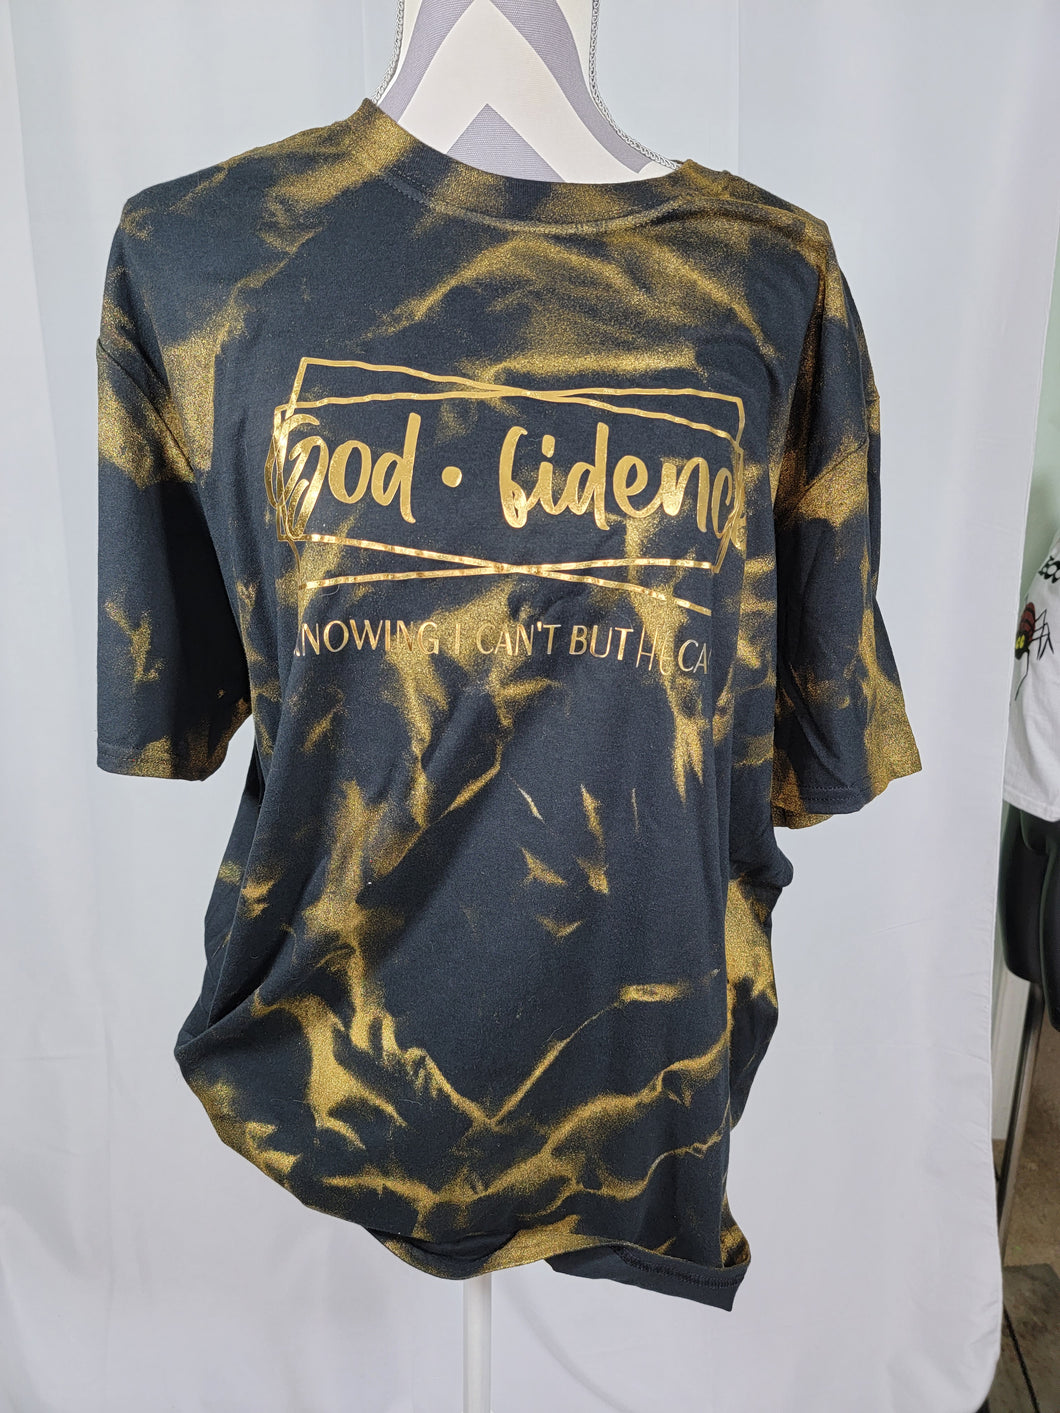 Black and Gold Tie Dye Godfidence T-shirt